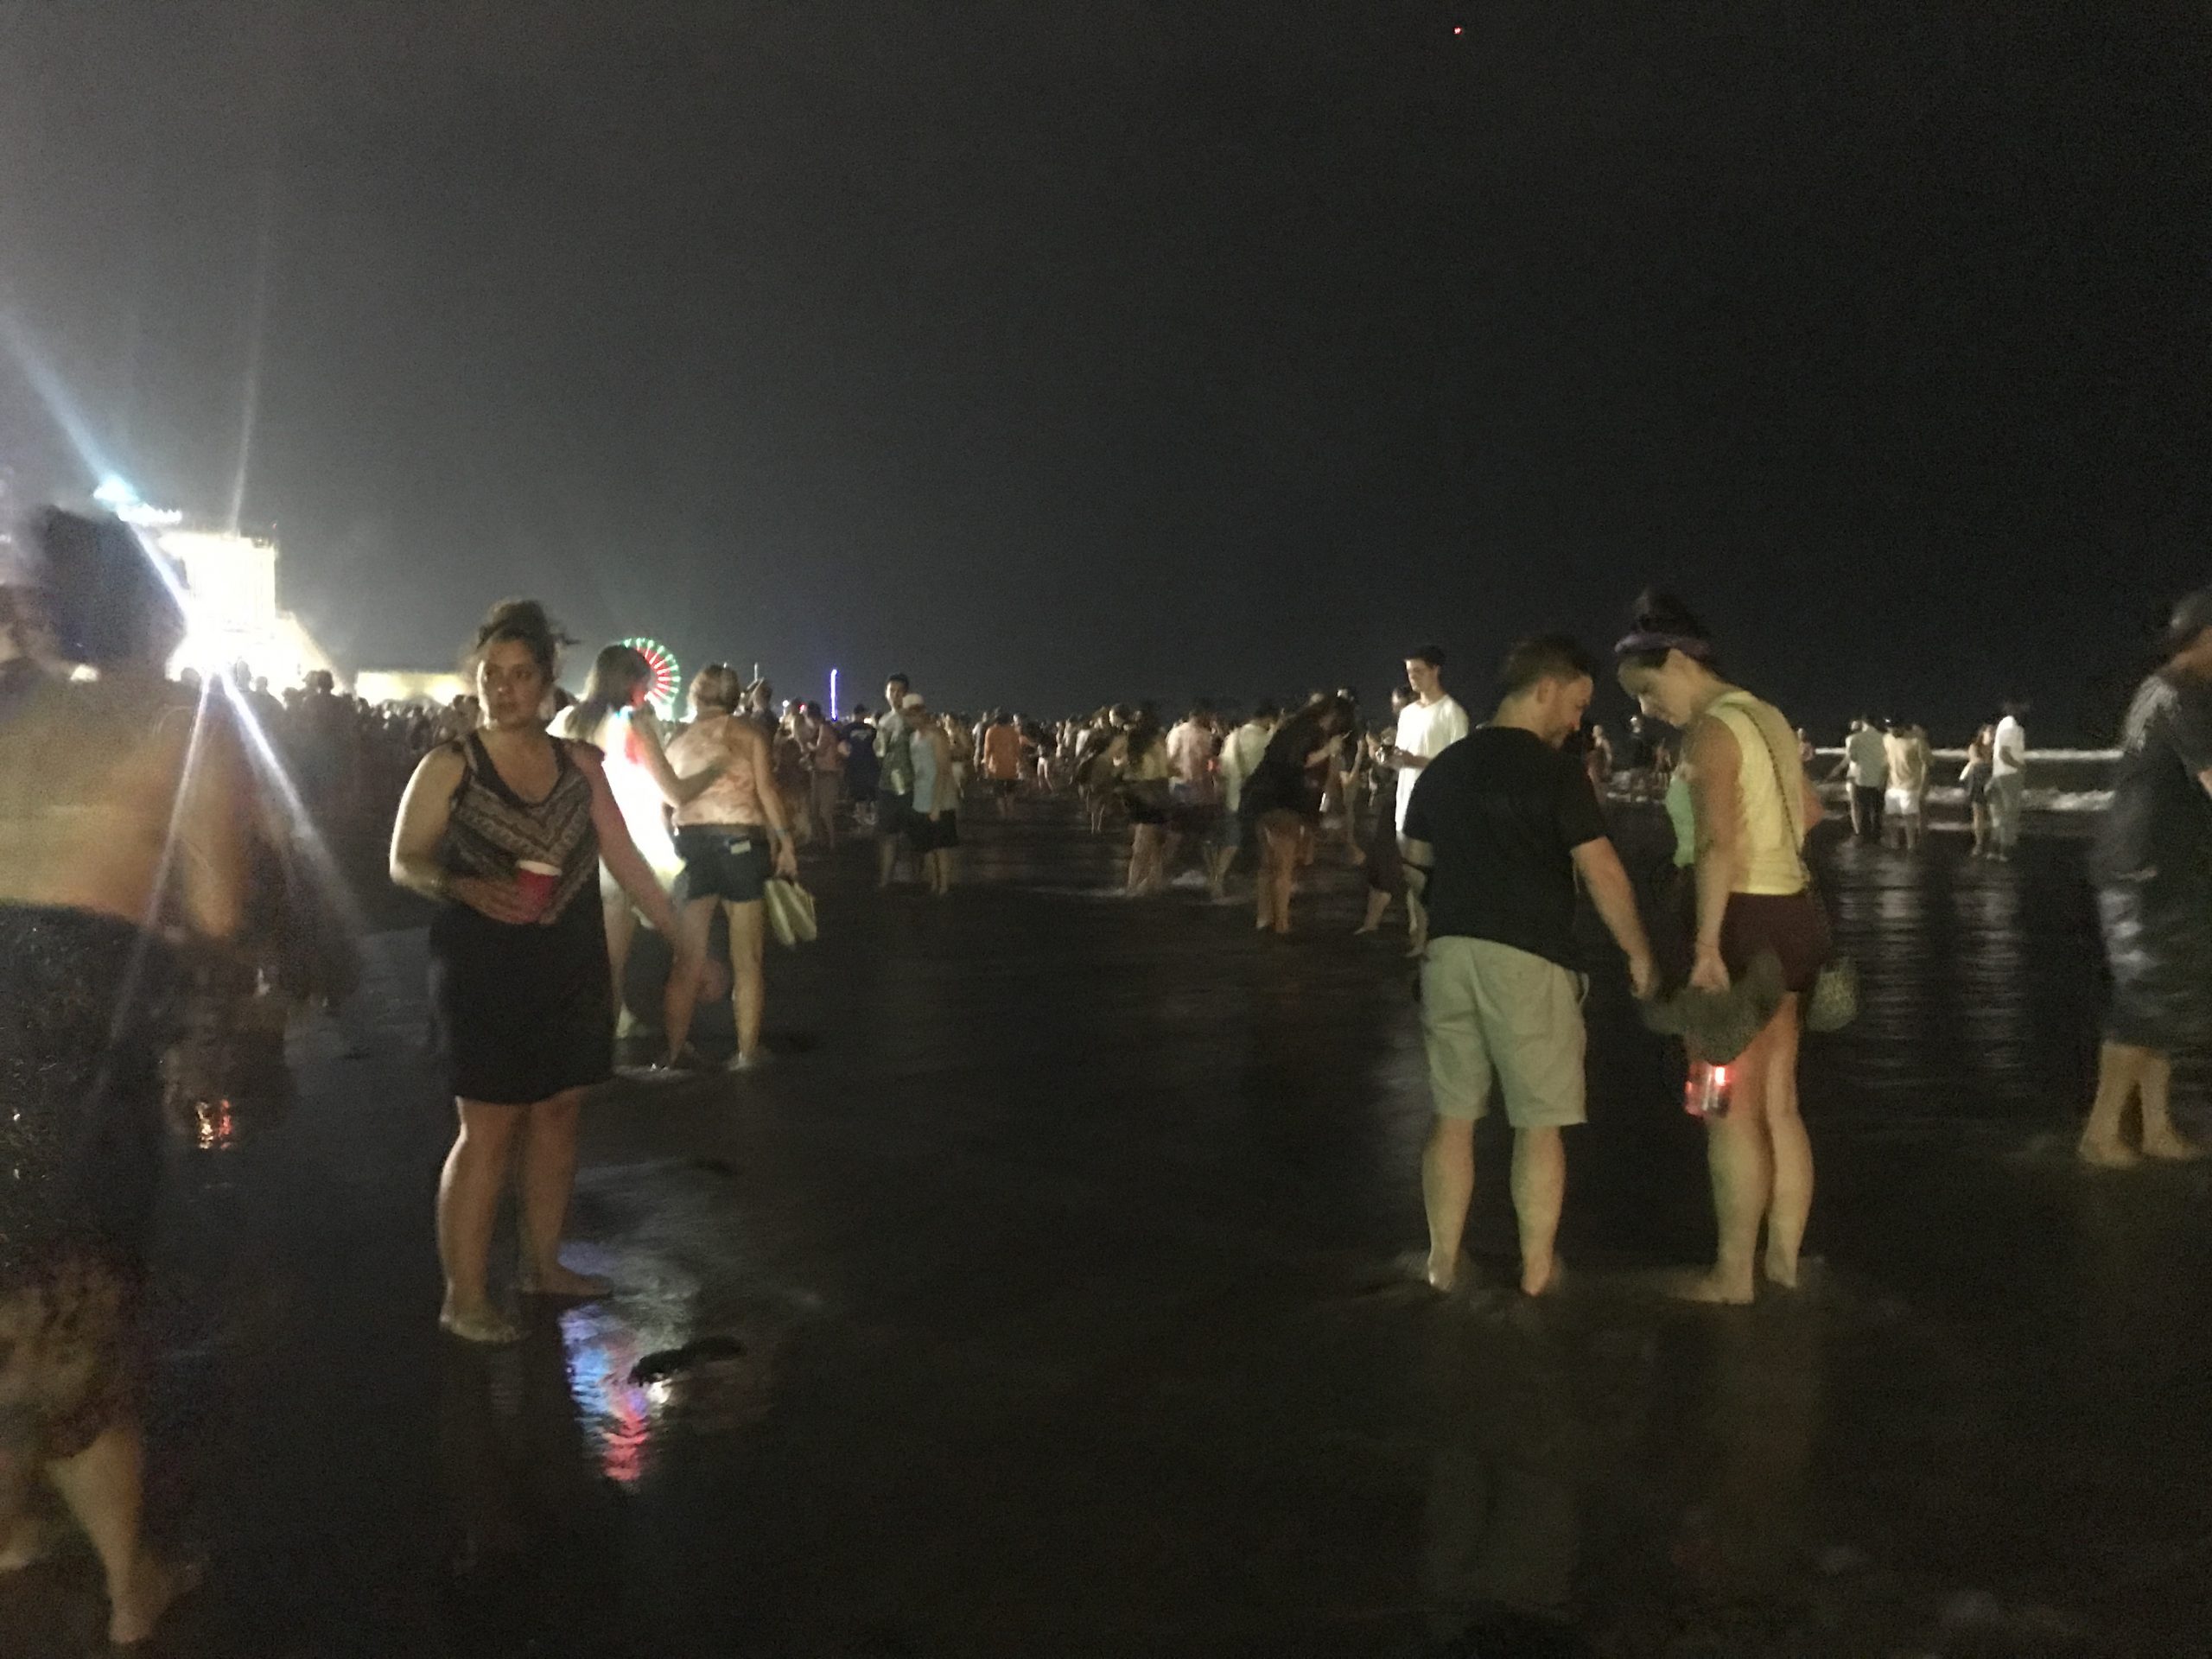 Phishheads cool off in the Atlantic Ocean during the set break Saturday, Aug. 14, 2021 in Atlantic City, New Jersey (Shaun R. Smith/The High Note).